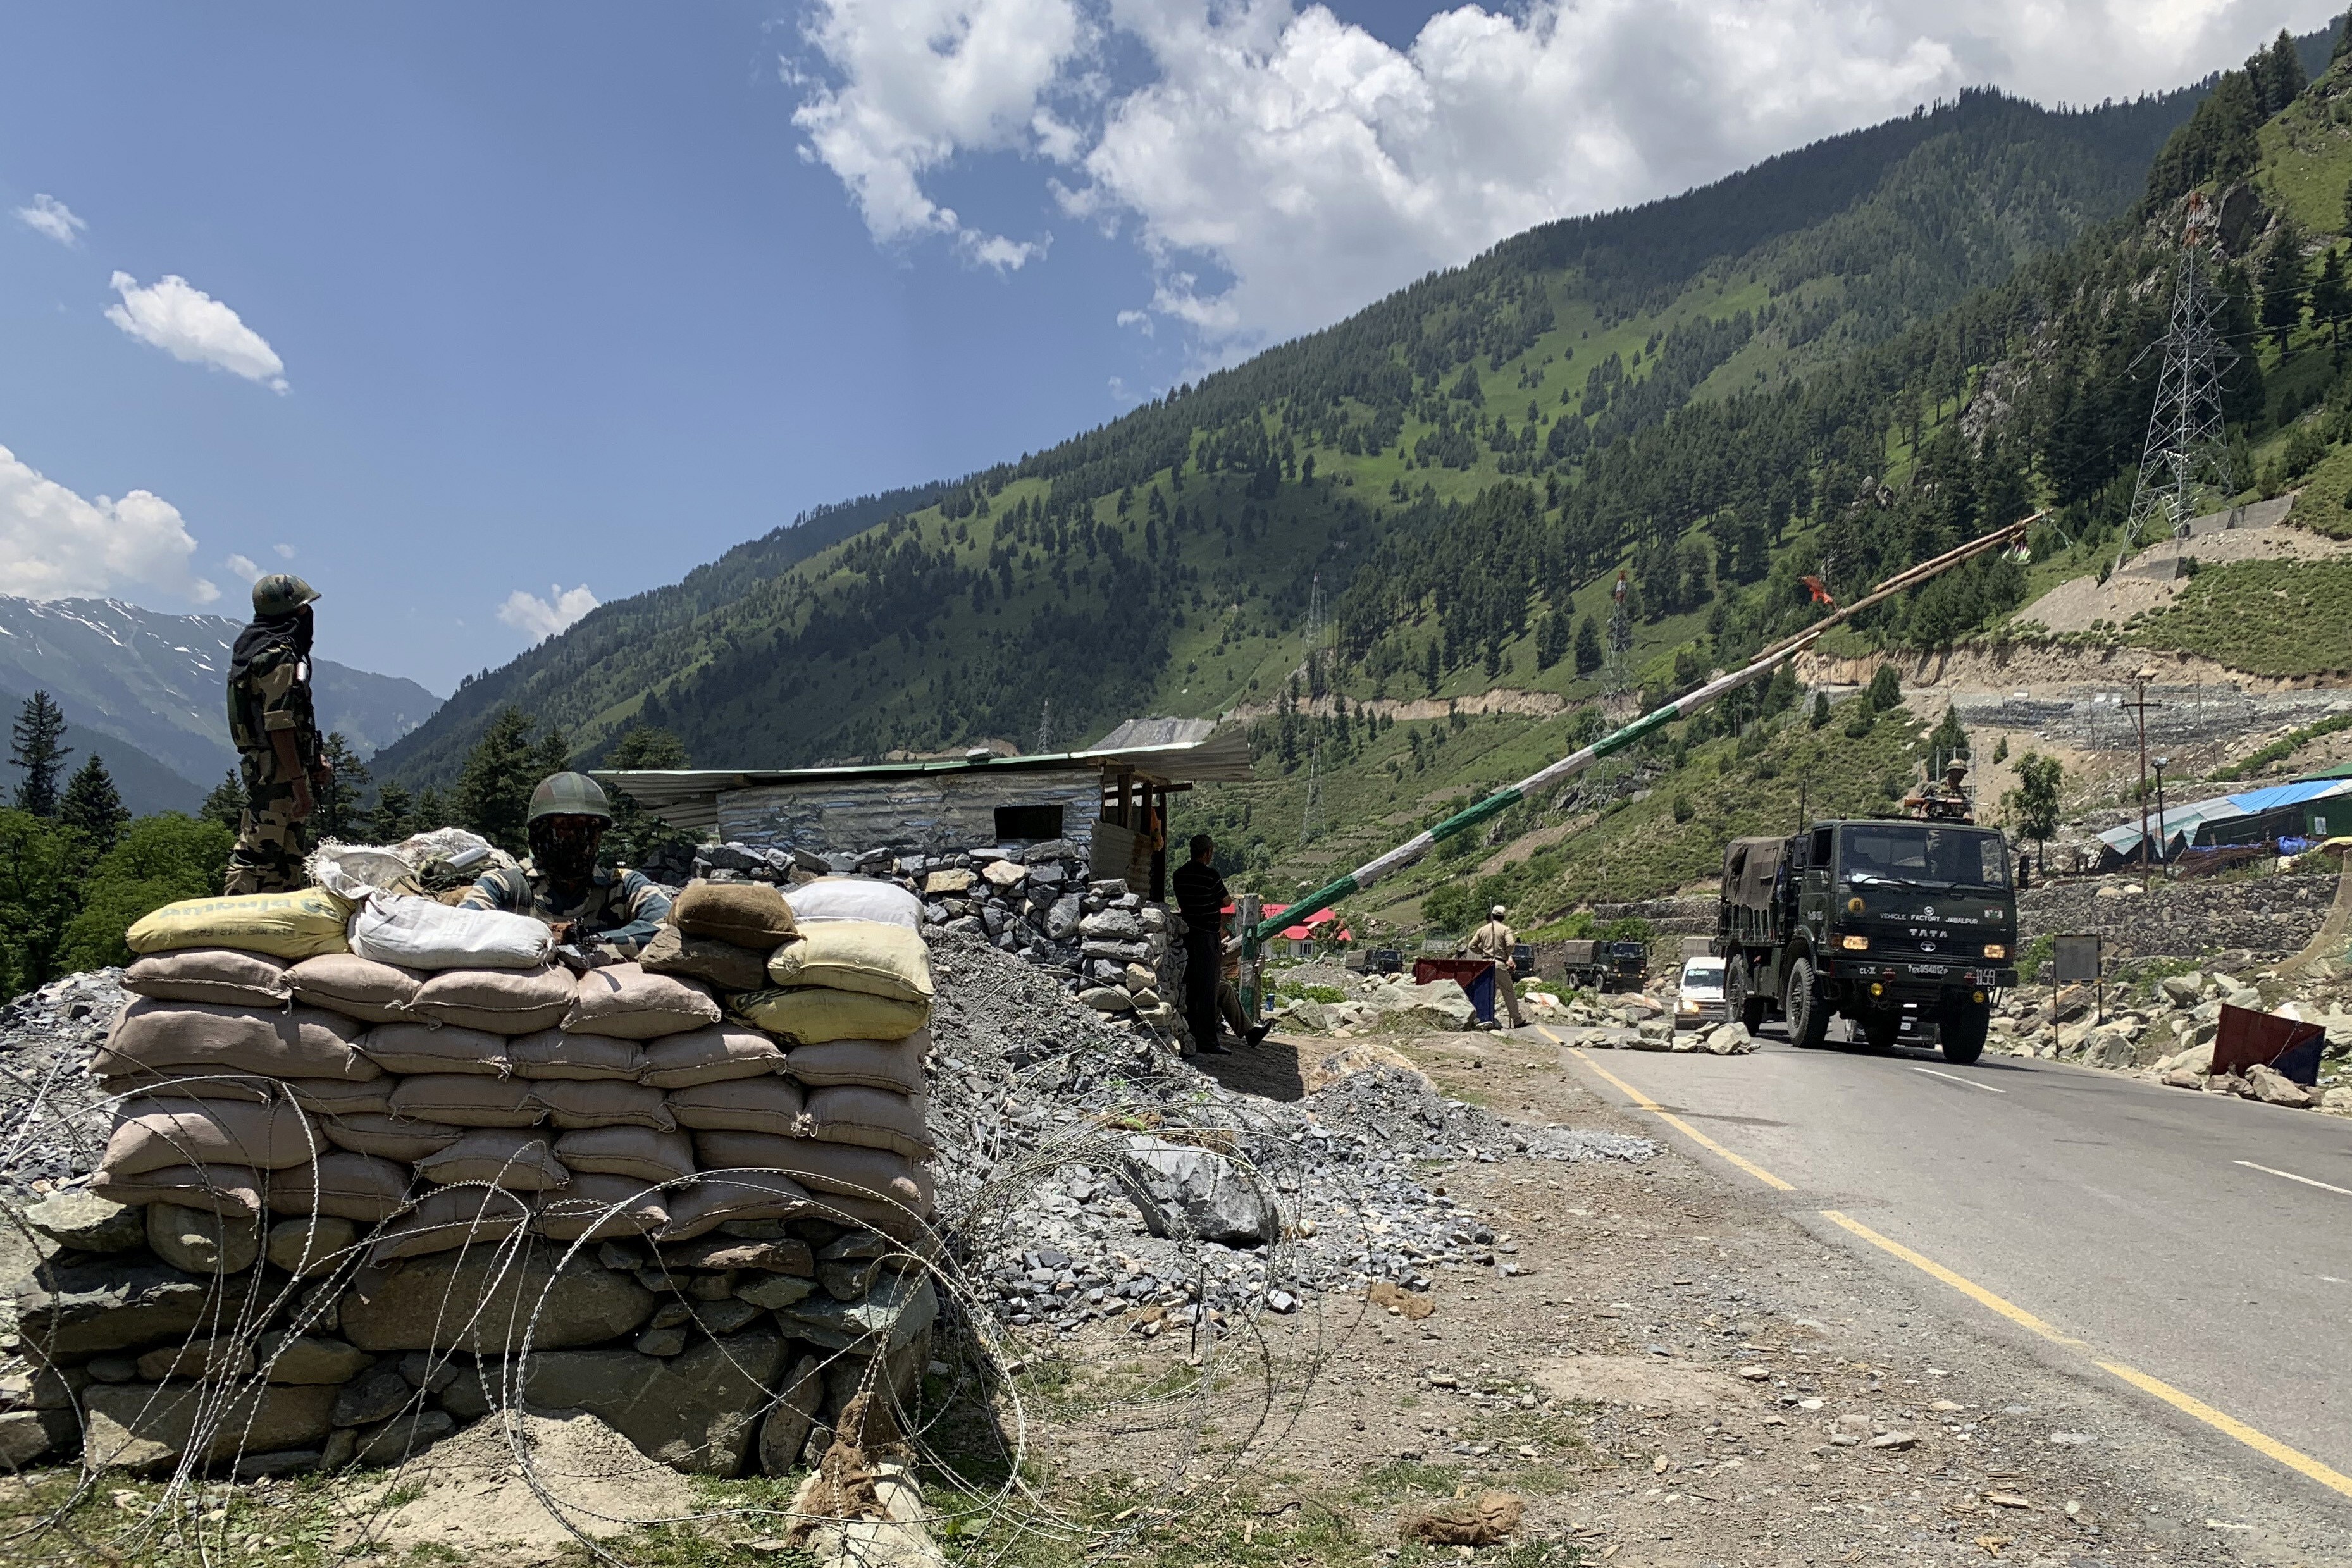 Indian soldiers keep guard as an army convoy moves on the Srinagar-Ladakh highway at Gagangeer, India on June 18. India has cautioned China against making “exaggerated and untenable claims” to the Galwan valley area even as both nations tried to end the stand-off. Photo: AP